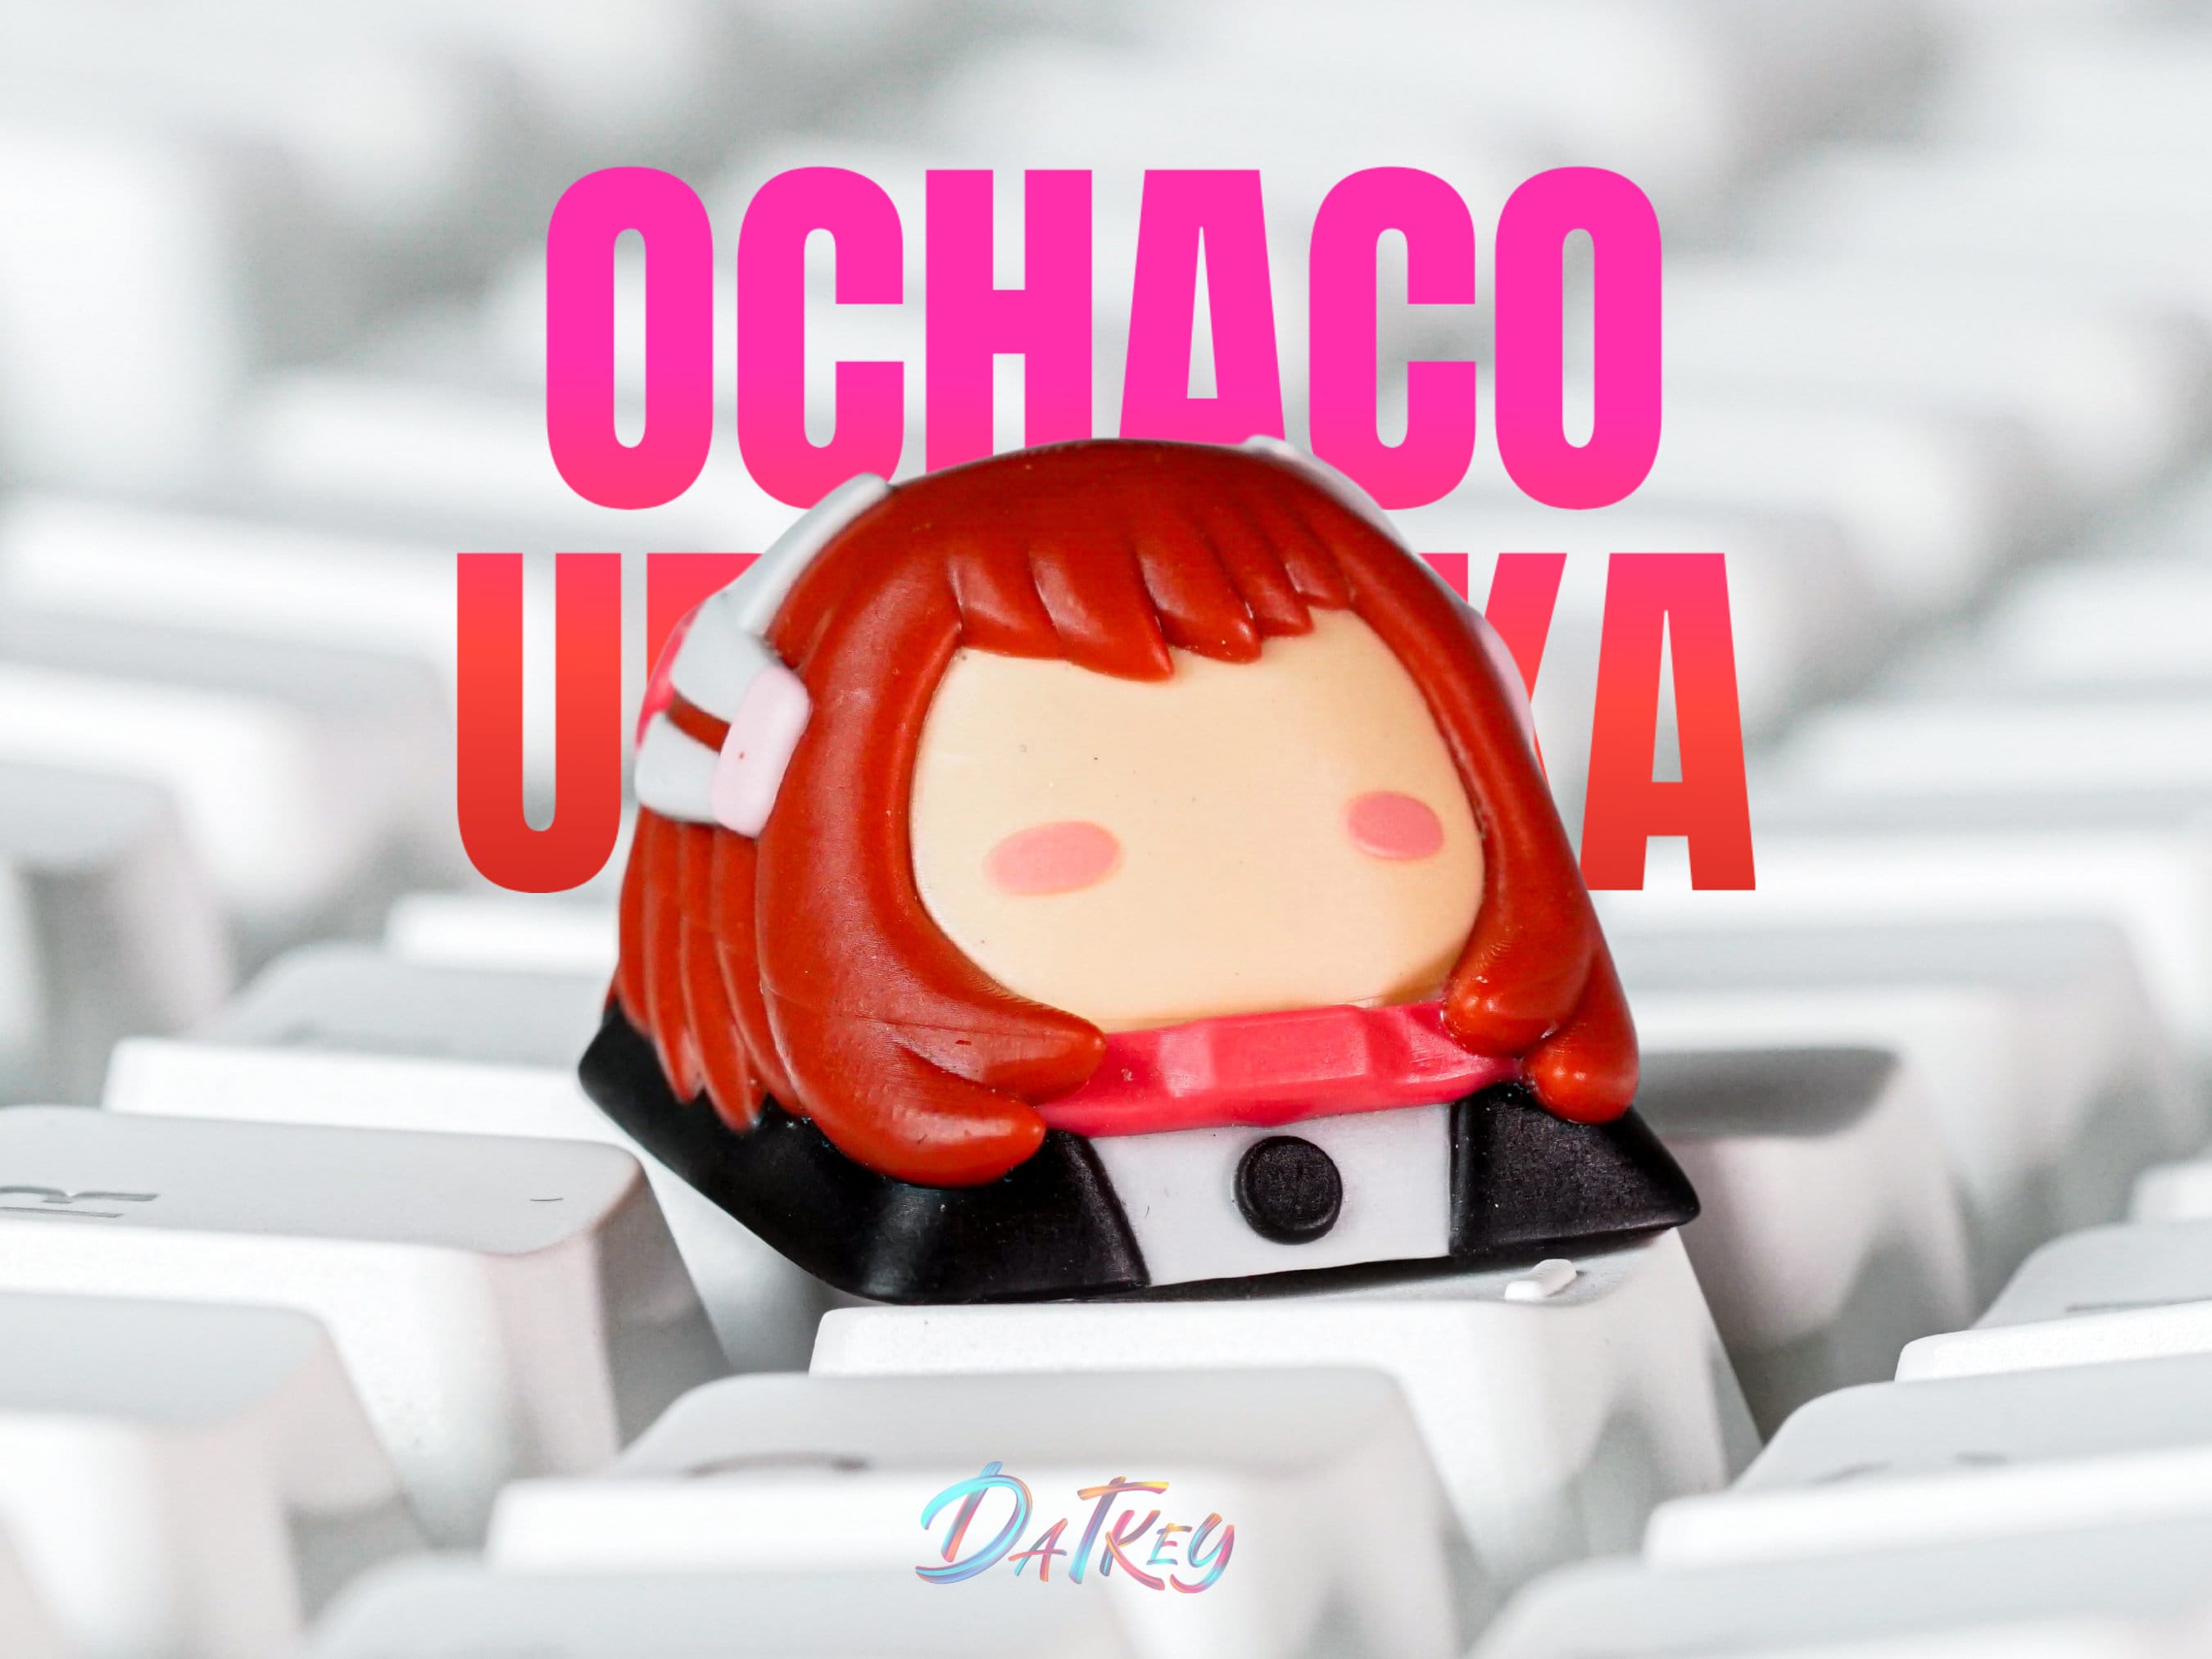 O.cha.co Ura.ra.ka Keycap, B.N.H.A Keycap, Anime Keycap, Keycap for MX Cherry Switches Mechanical Keyboard, Handmade Anime Gift